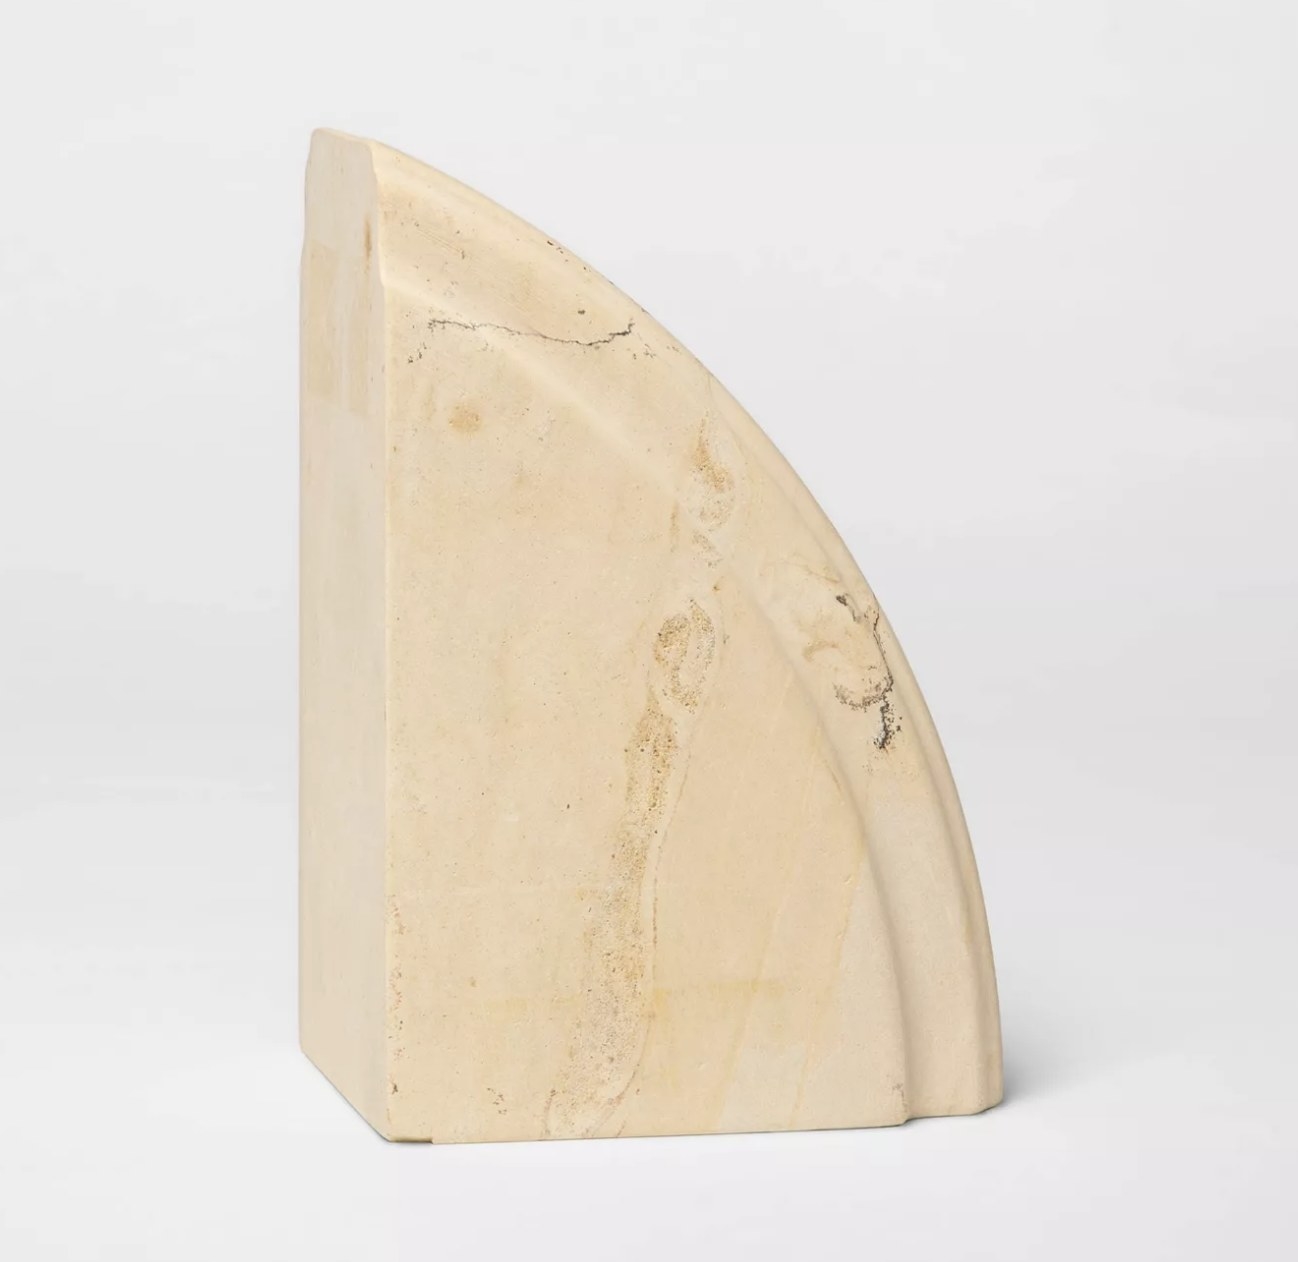 A beige, curved limestone bookend